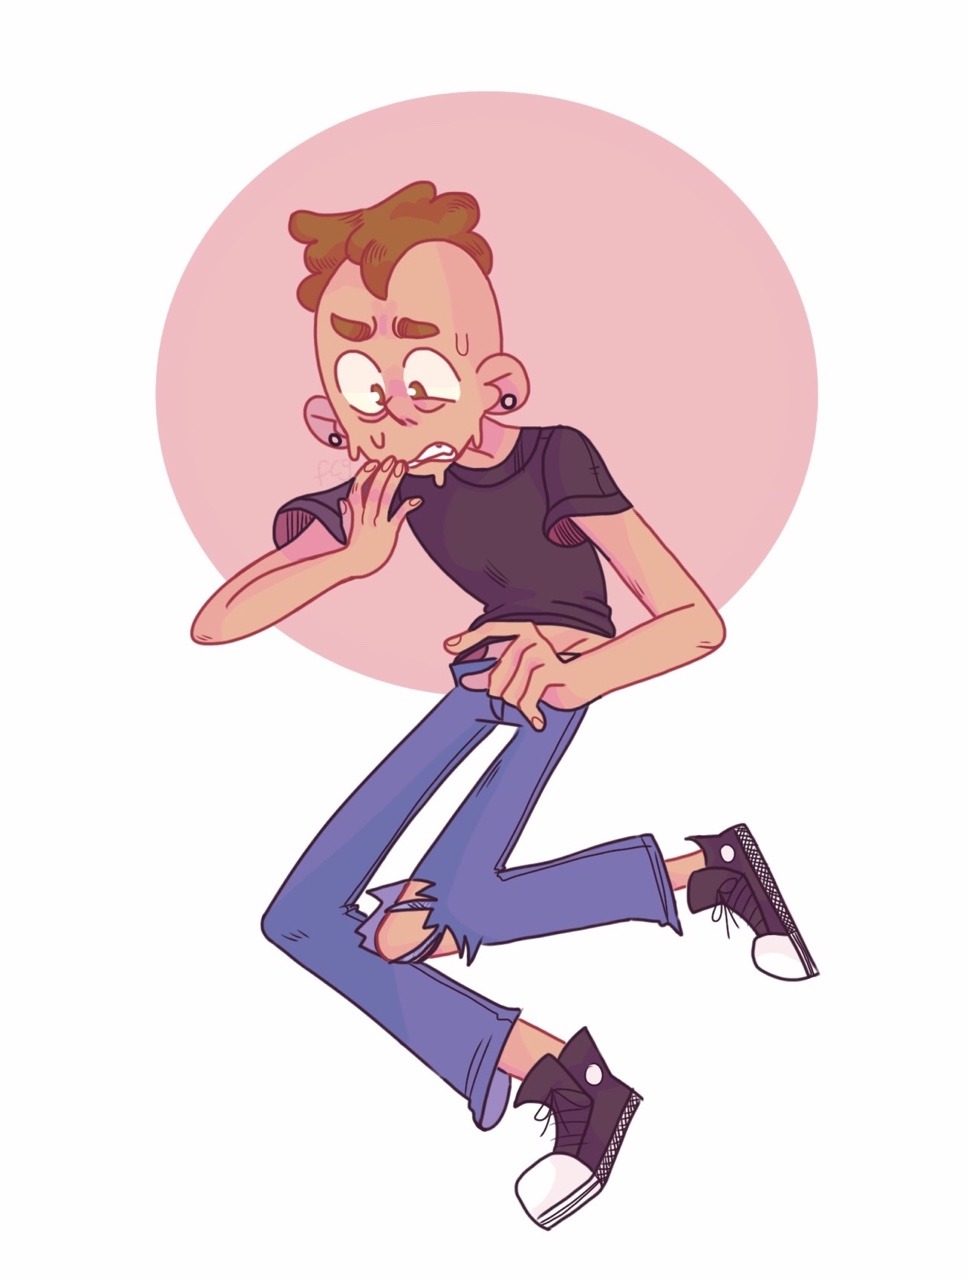 I’m ready for some Lars character development